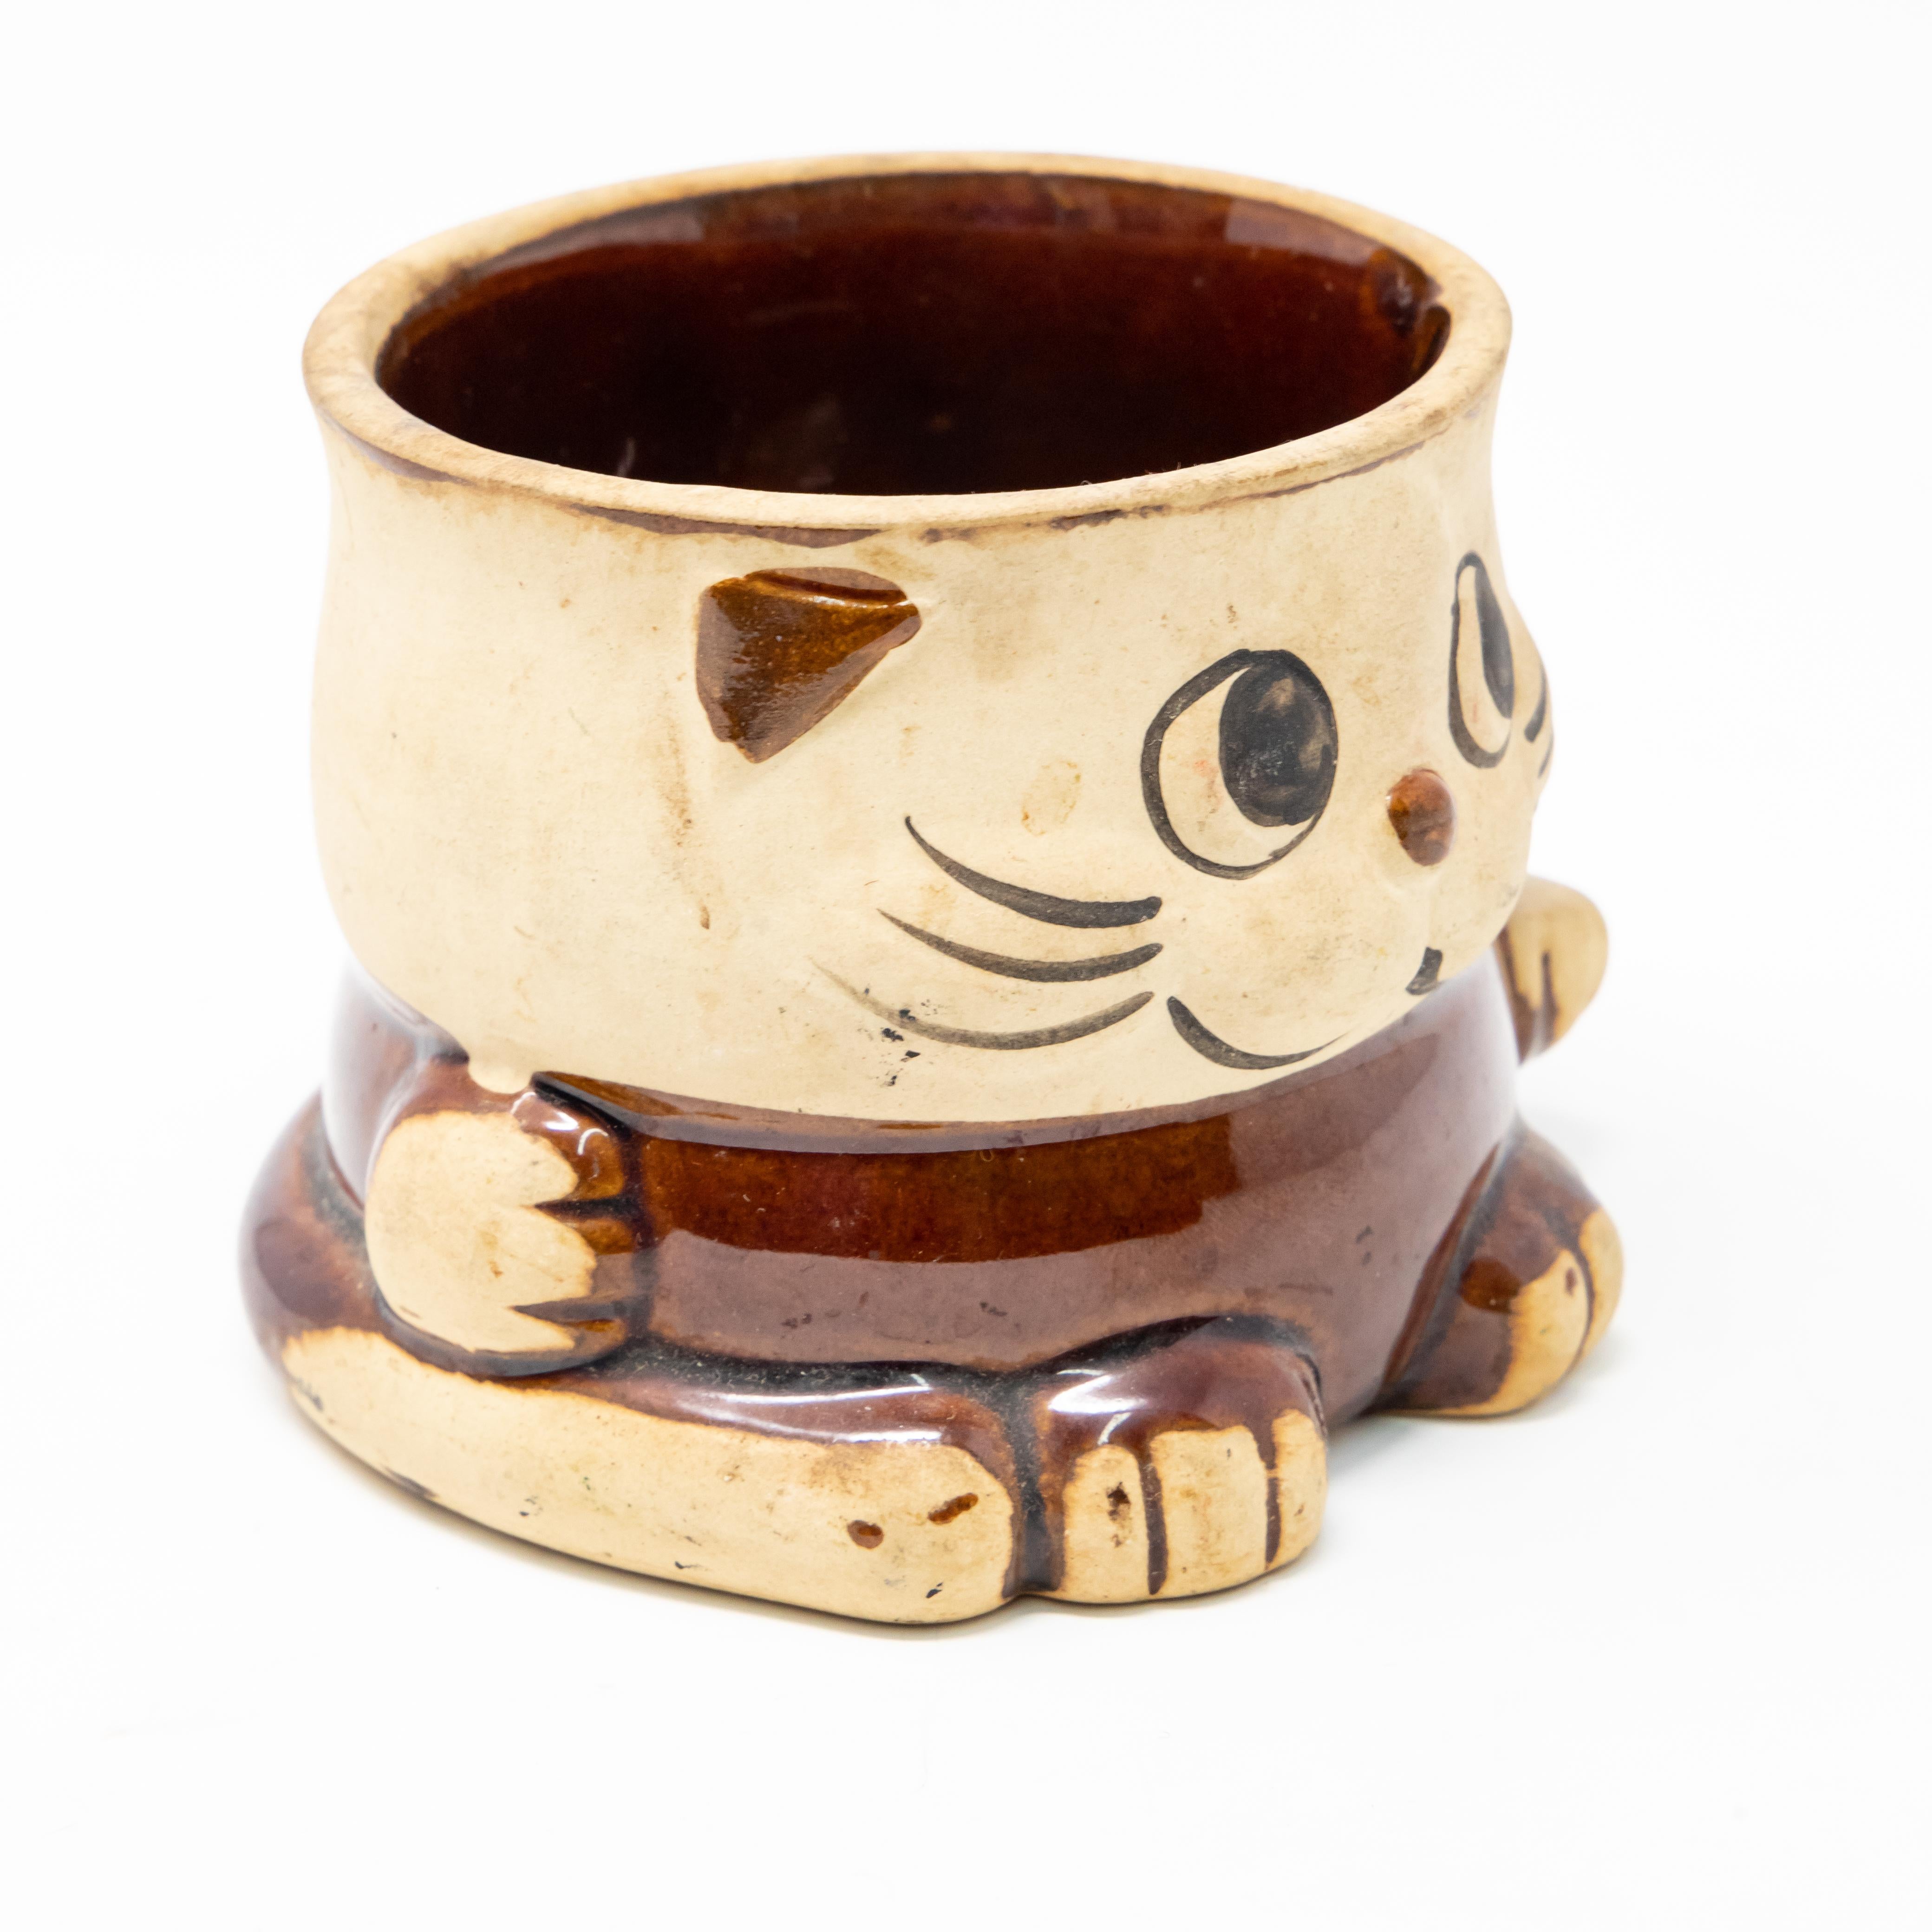 Offering a vintage feline themed mug. Brown and cream with a hand painted face.